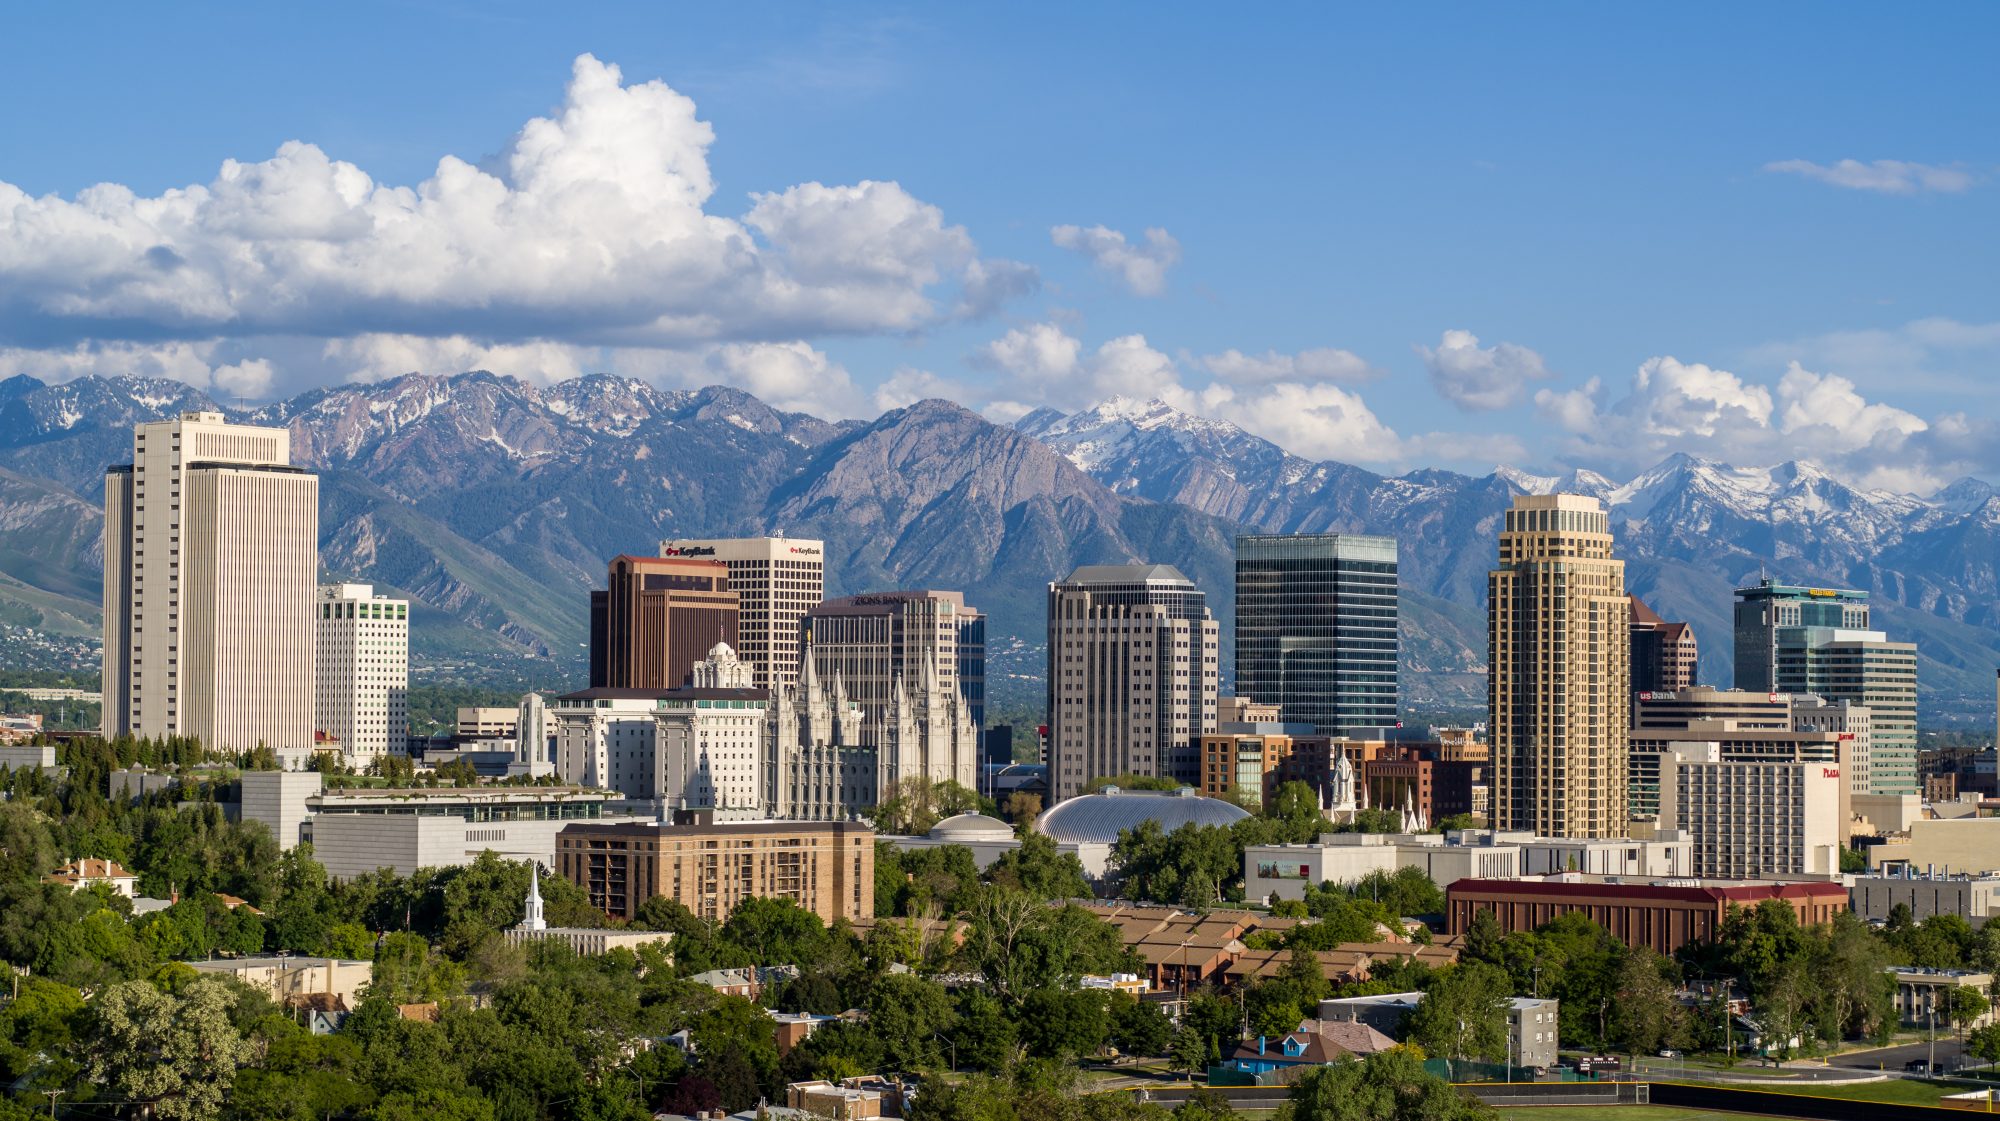 Salt Lake City has a wide variety of accommodation options